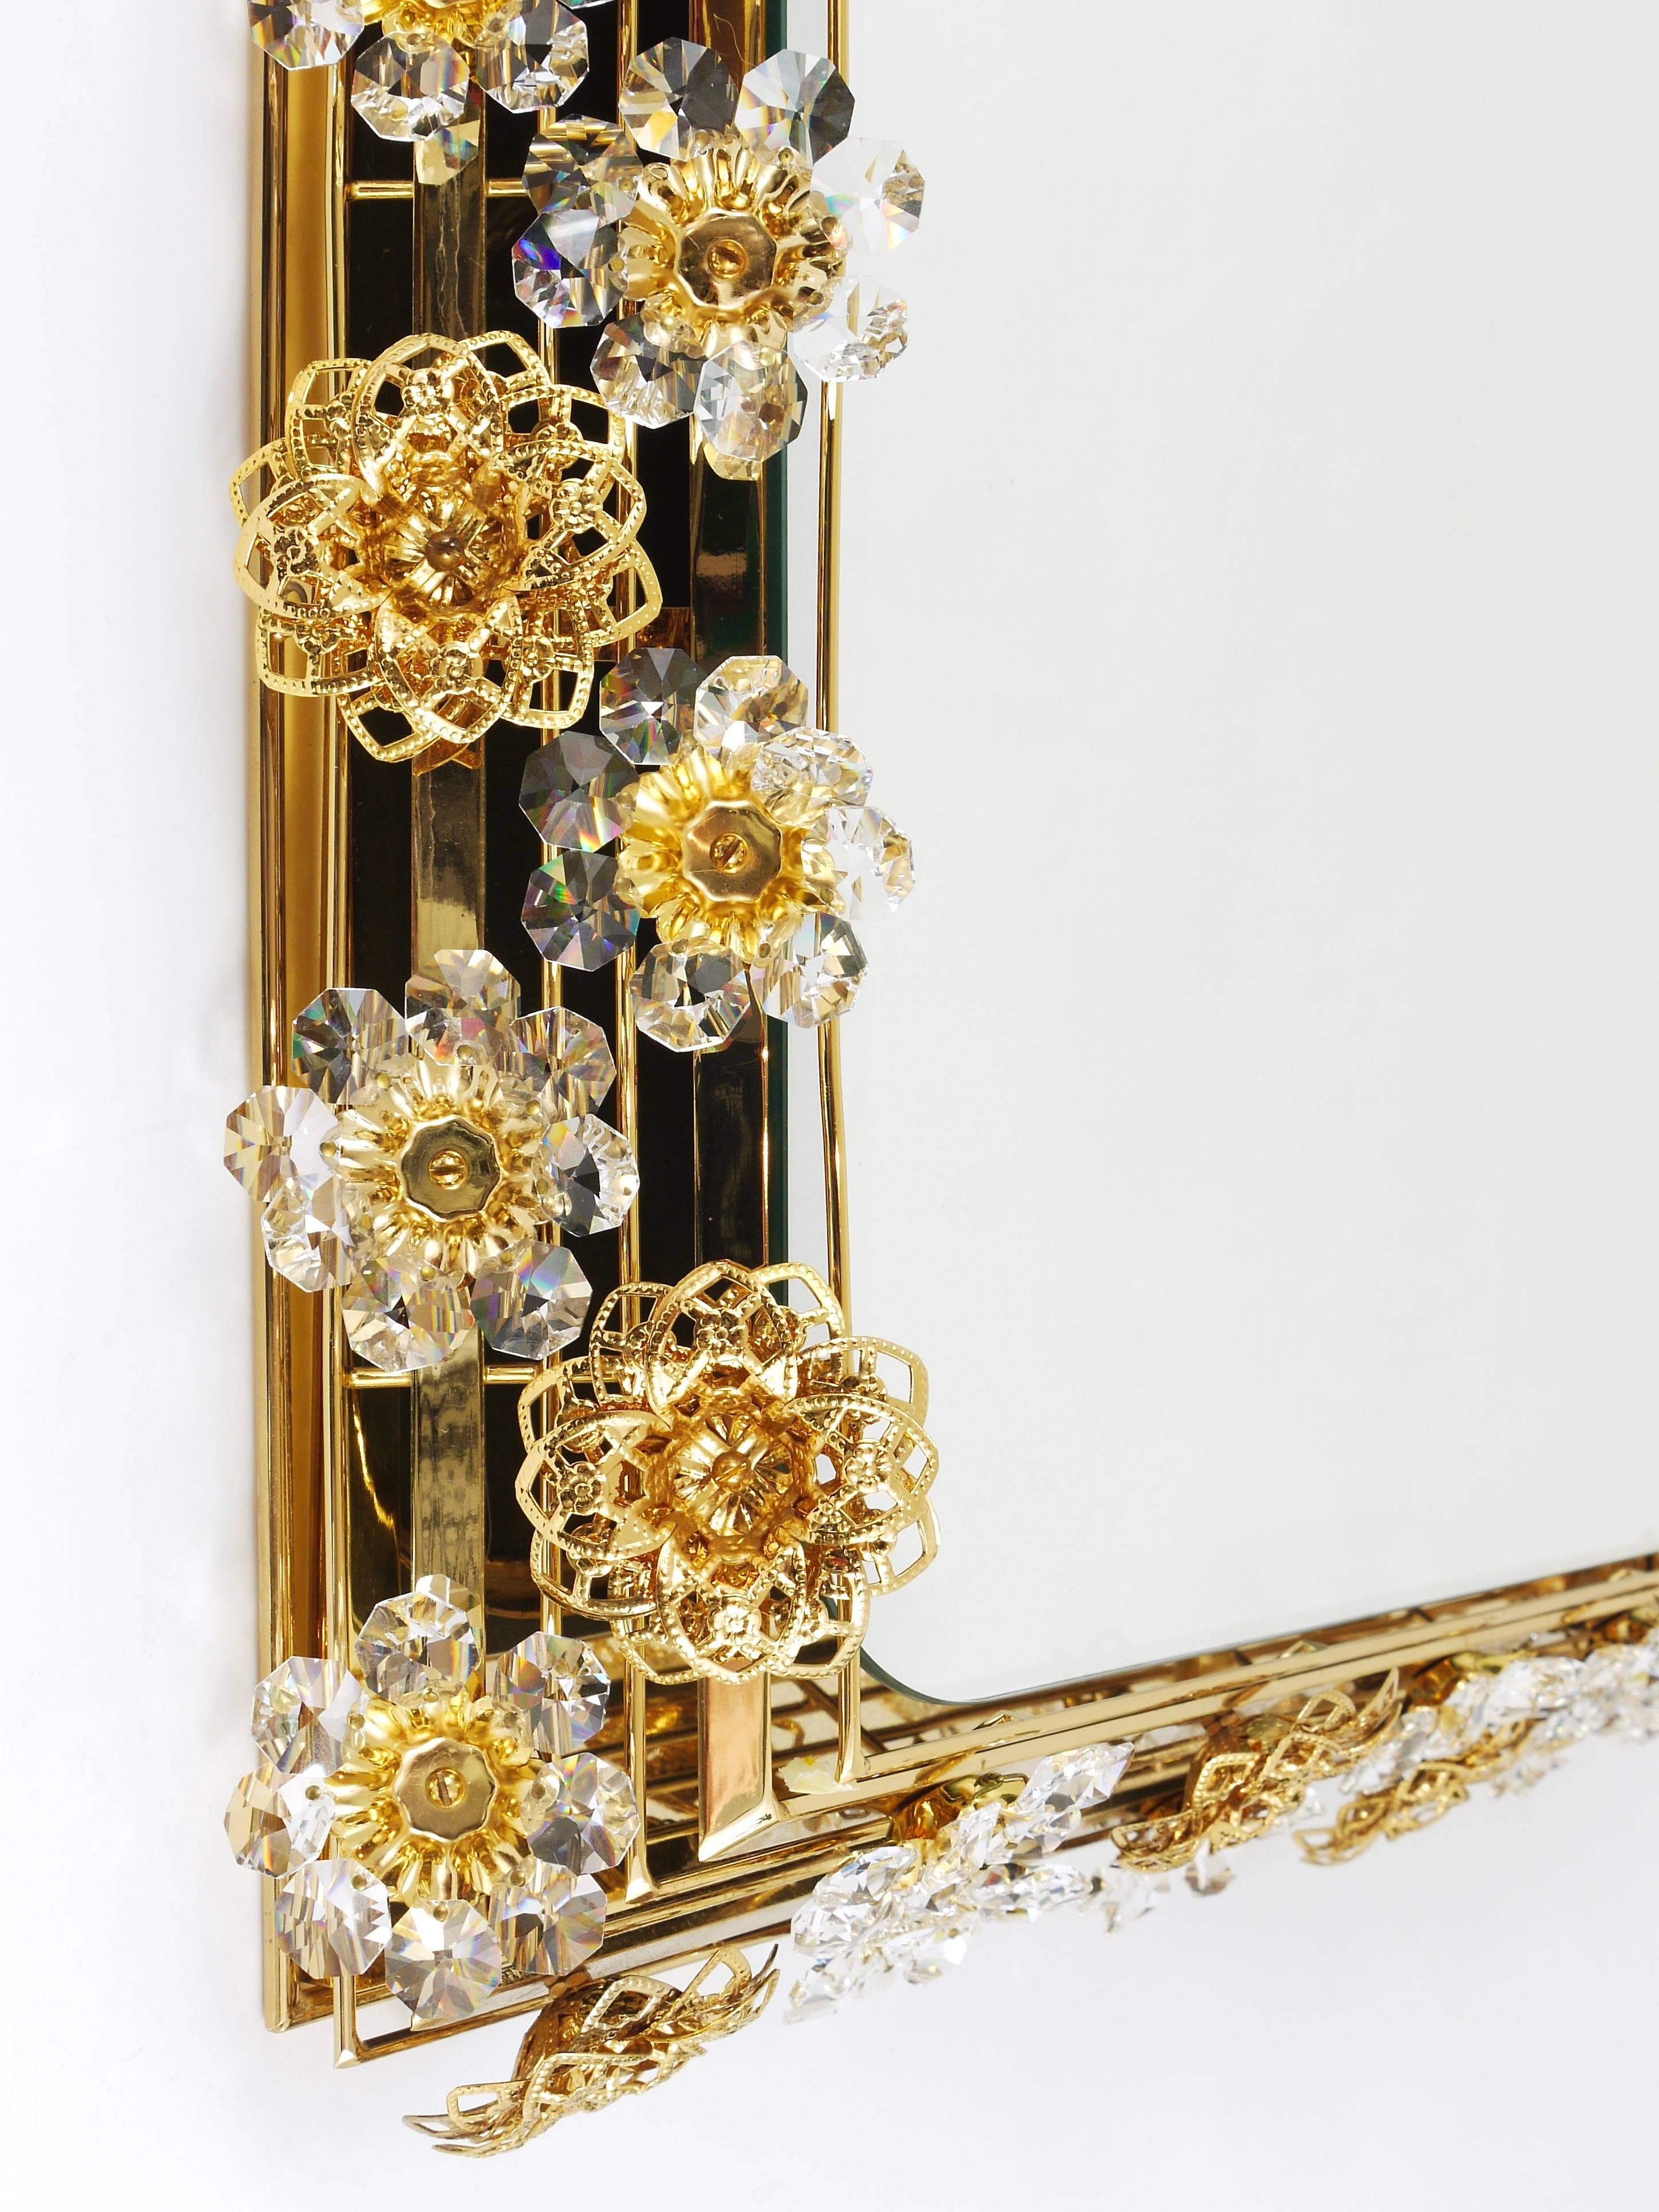 Ernst Palme Palwa Large Illuminated Flower Wall Mirror, Brass & Crystals, 1970s For Sale 1